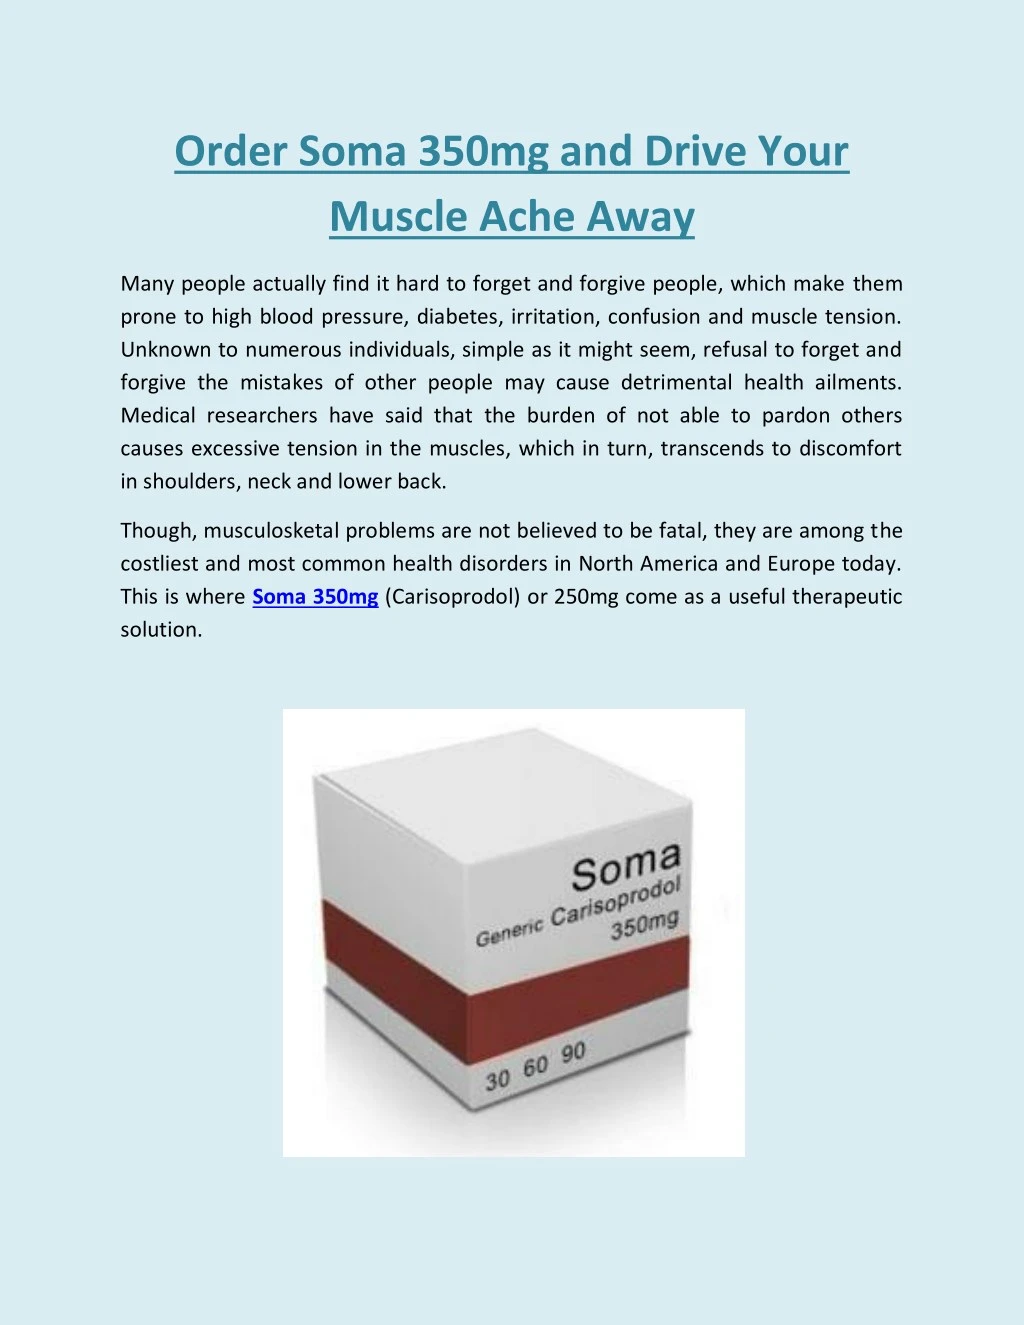 order soma 350mg and drive your muscle ache away